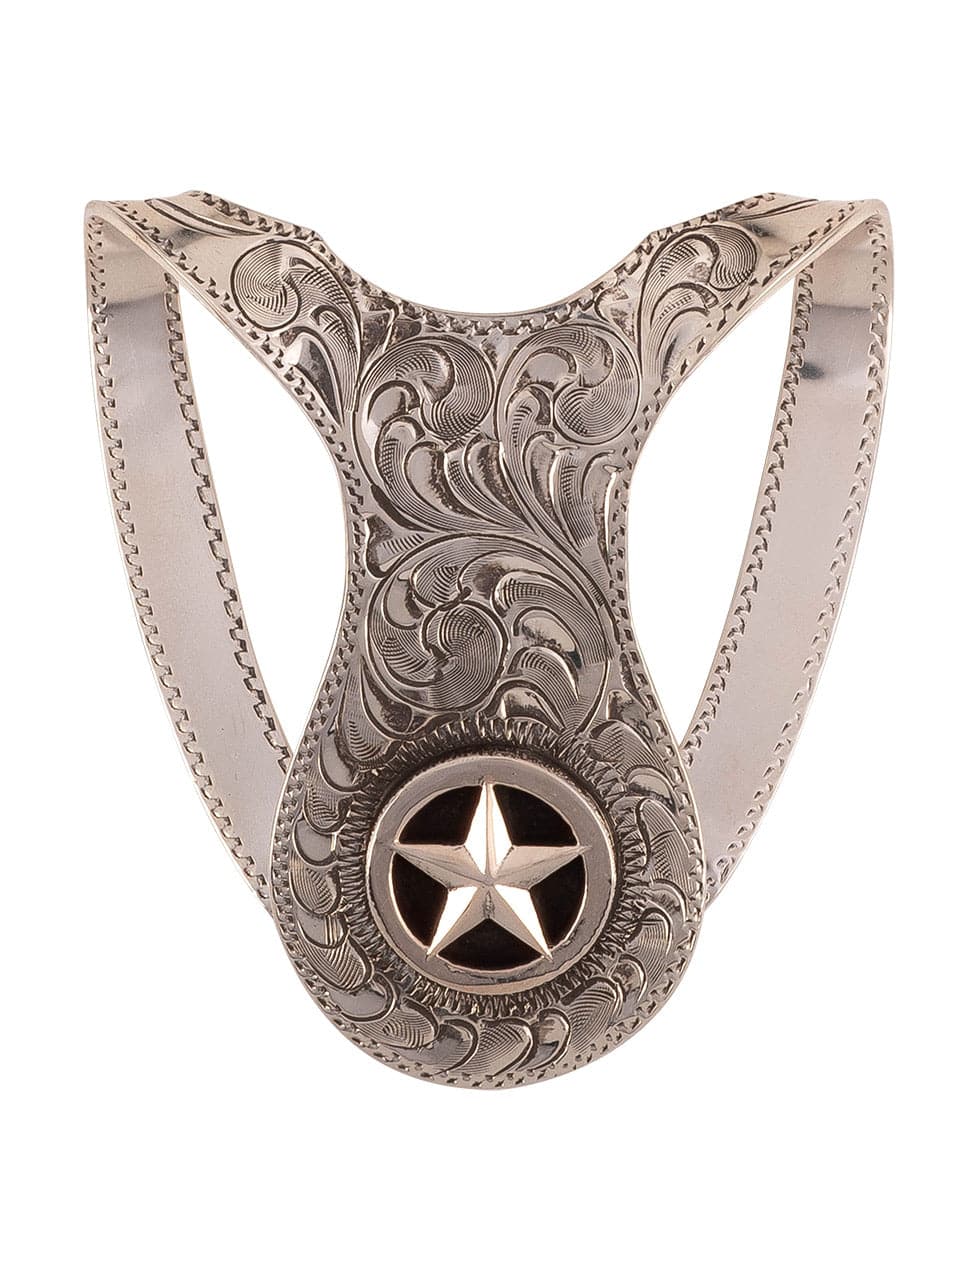 Pinto Ranch Sterling Silver Engraved Star Money Clip